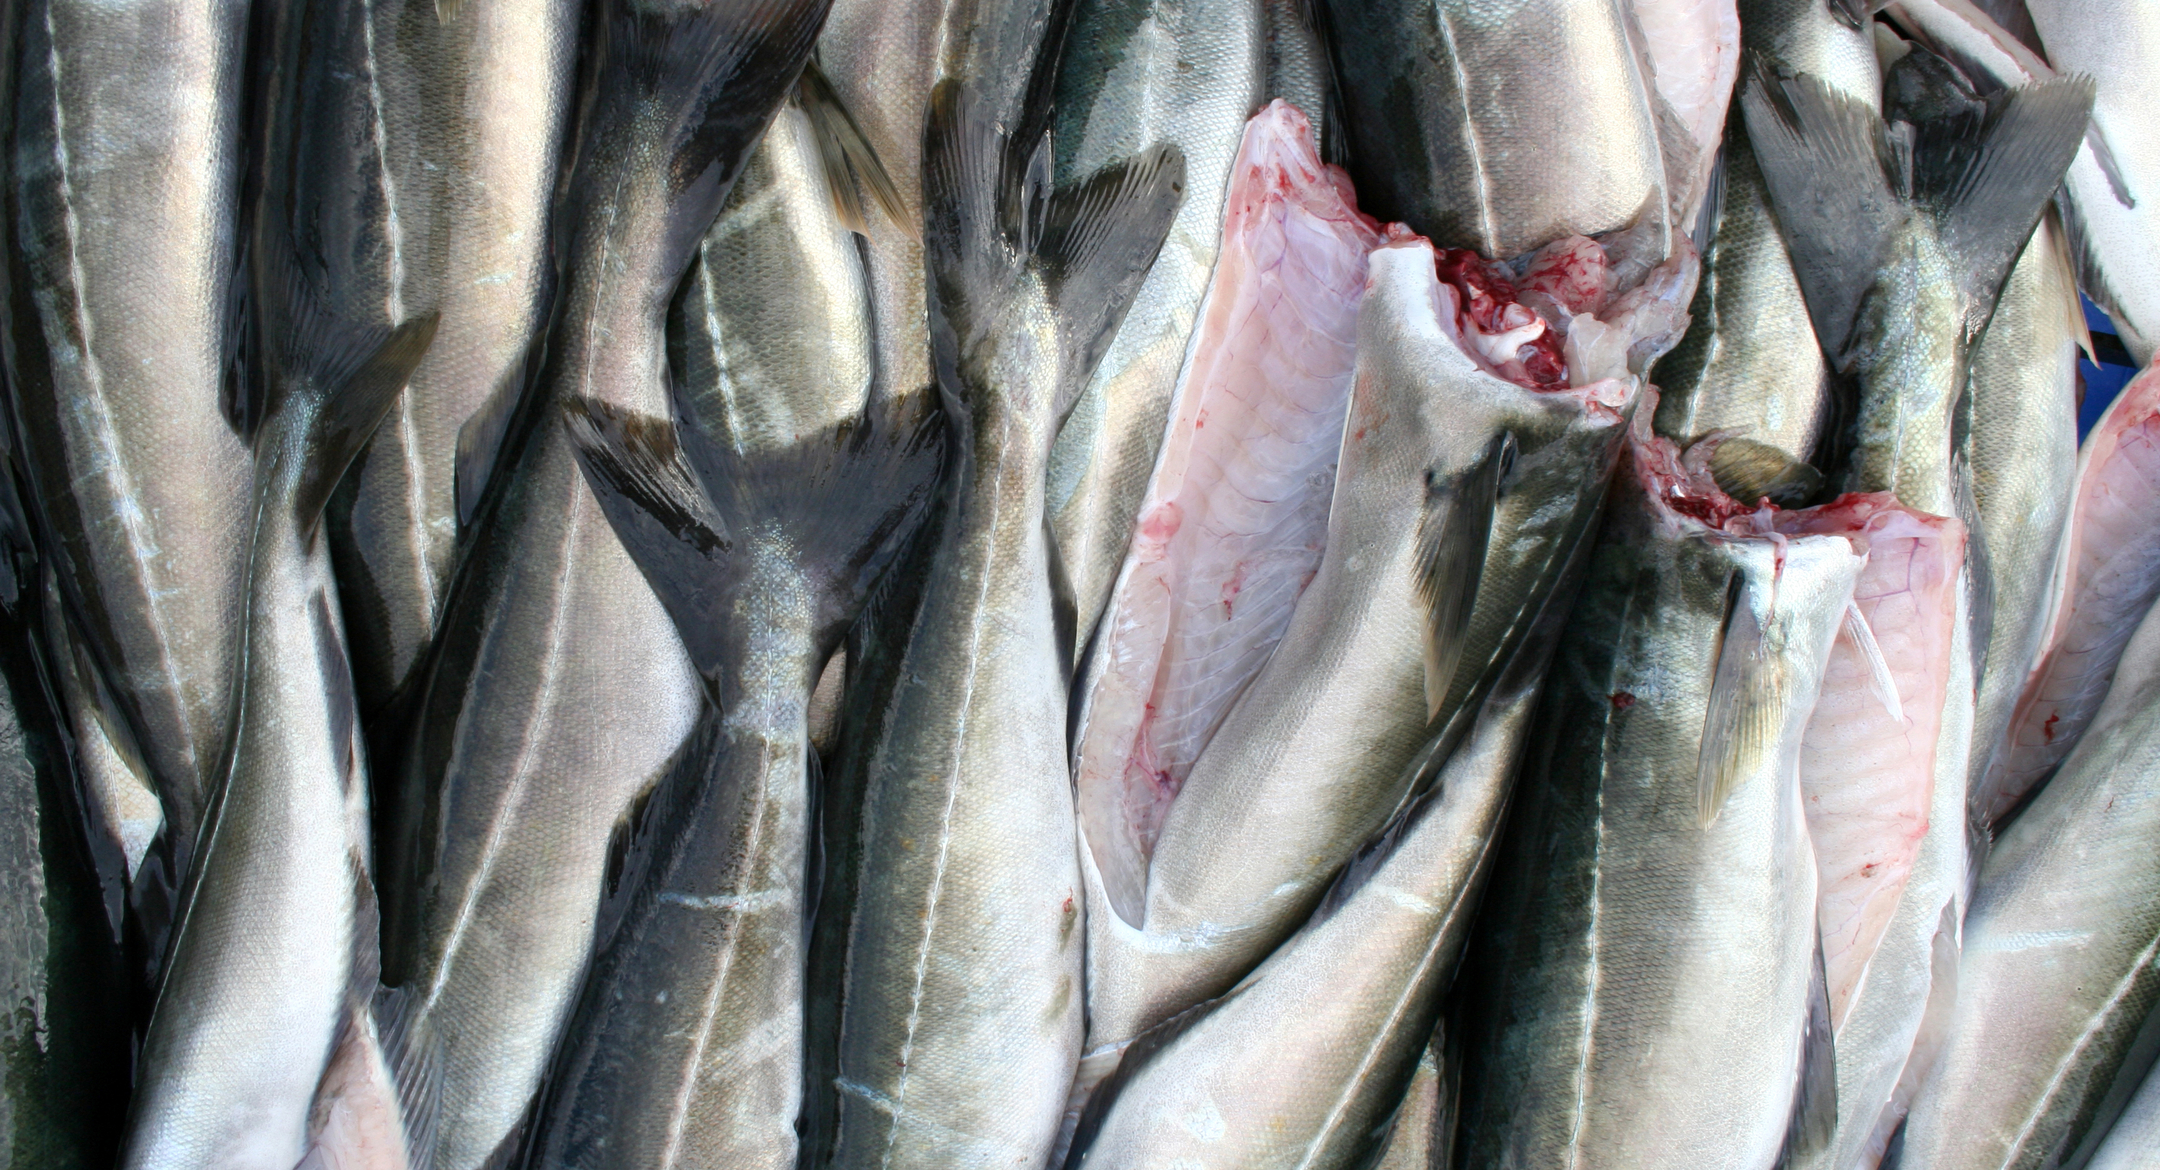 stock fish suppliers in norway